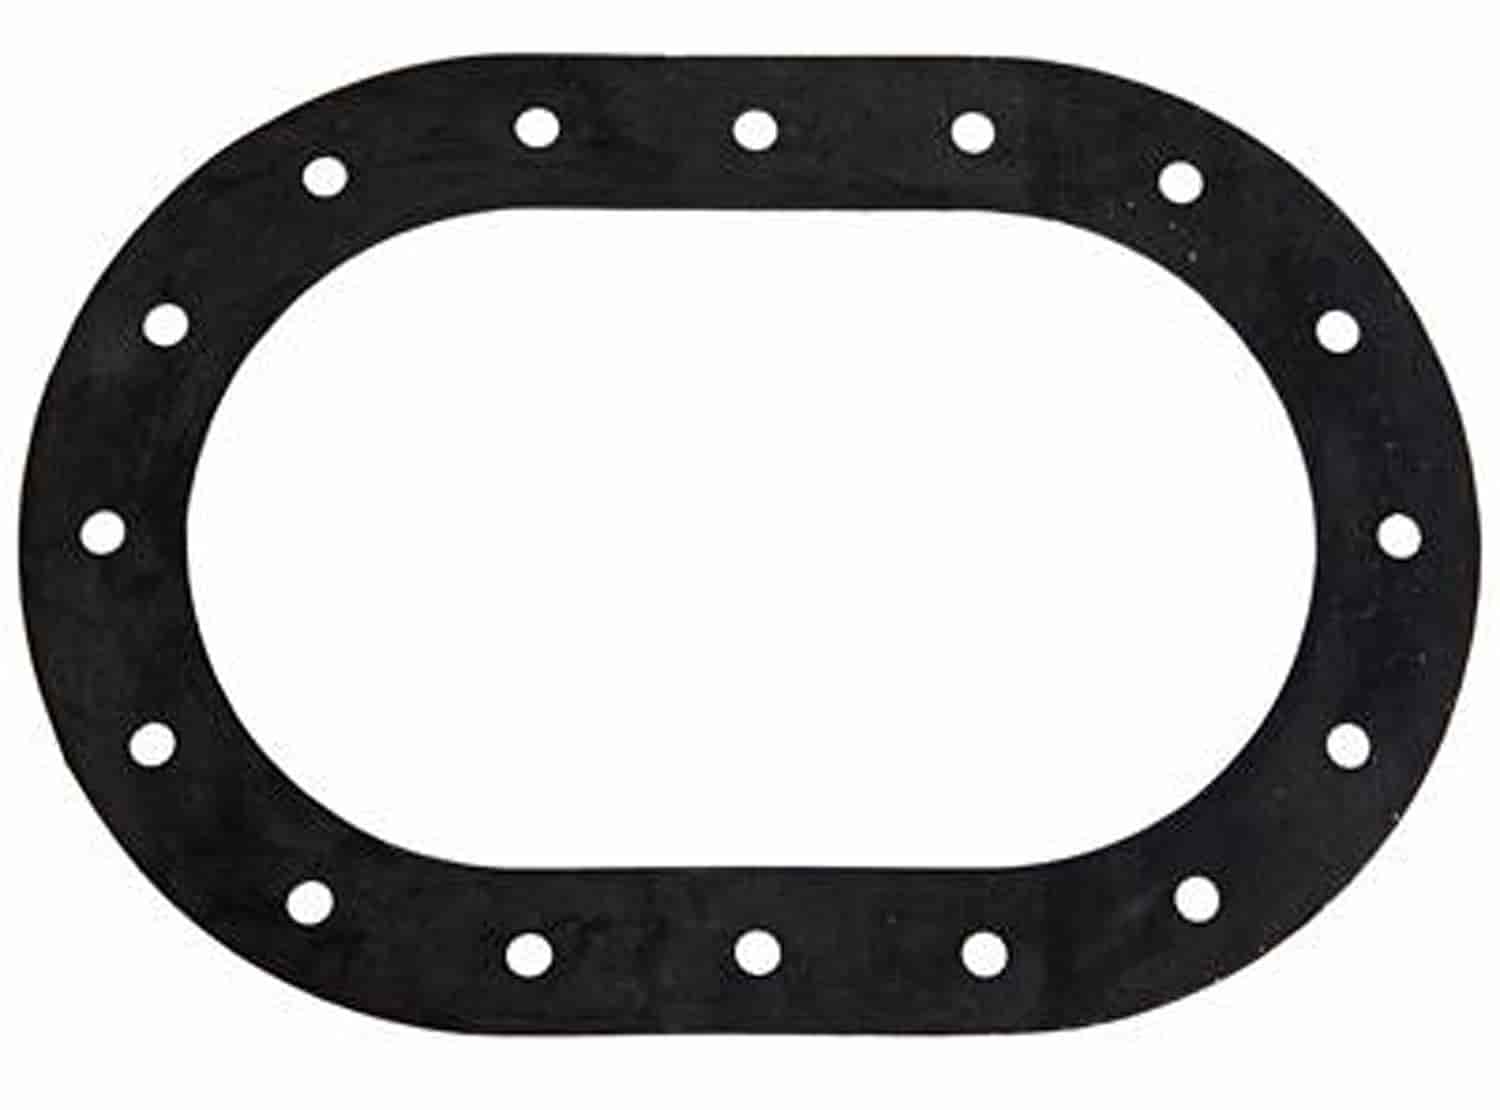 16-Bolt Oval Fuel Cell Gasket